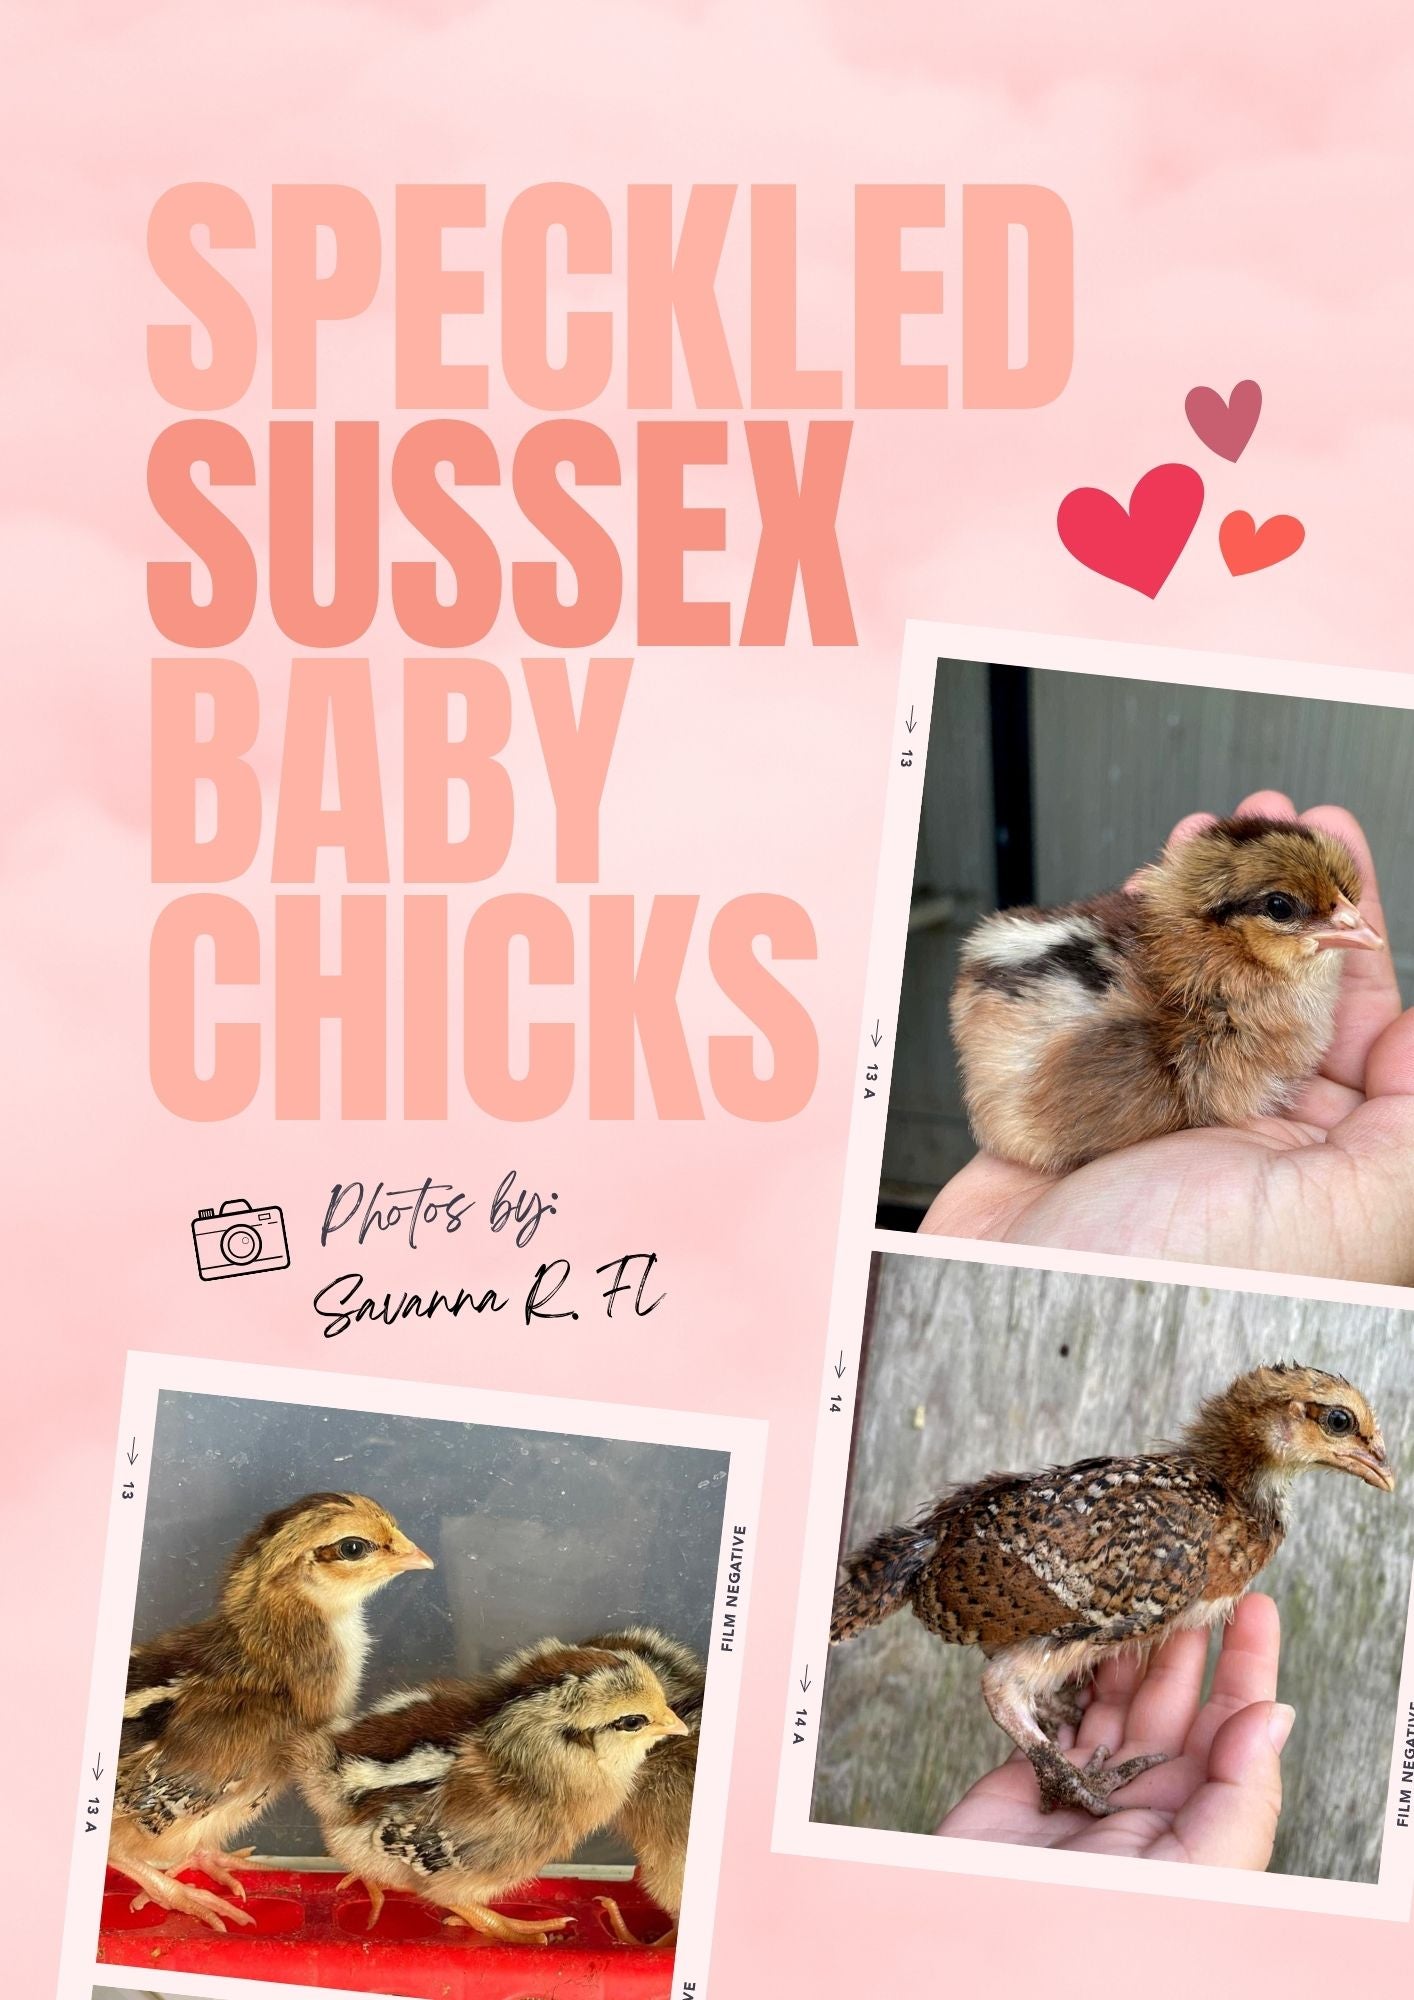 speckled sussex baby chicks